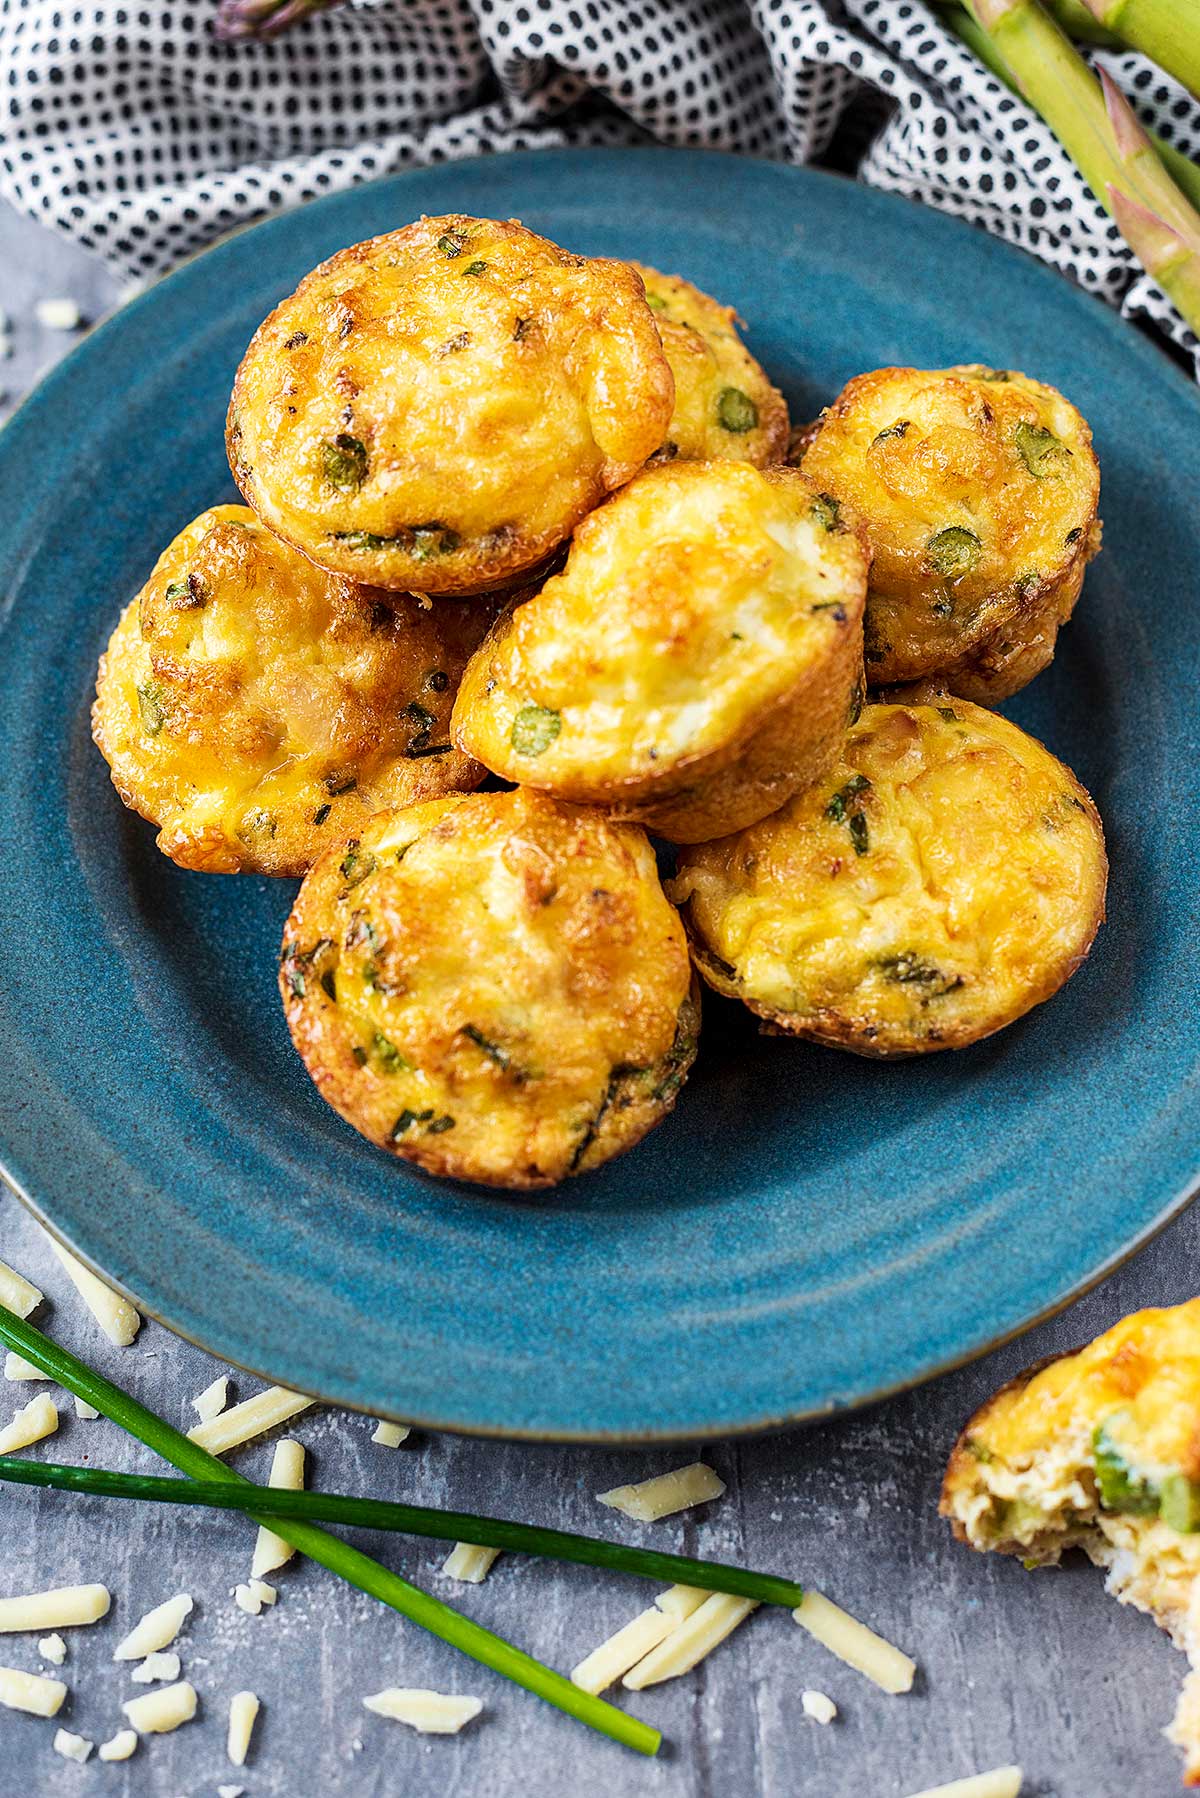 Salmon egg muffins piled up on a blue plate.